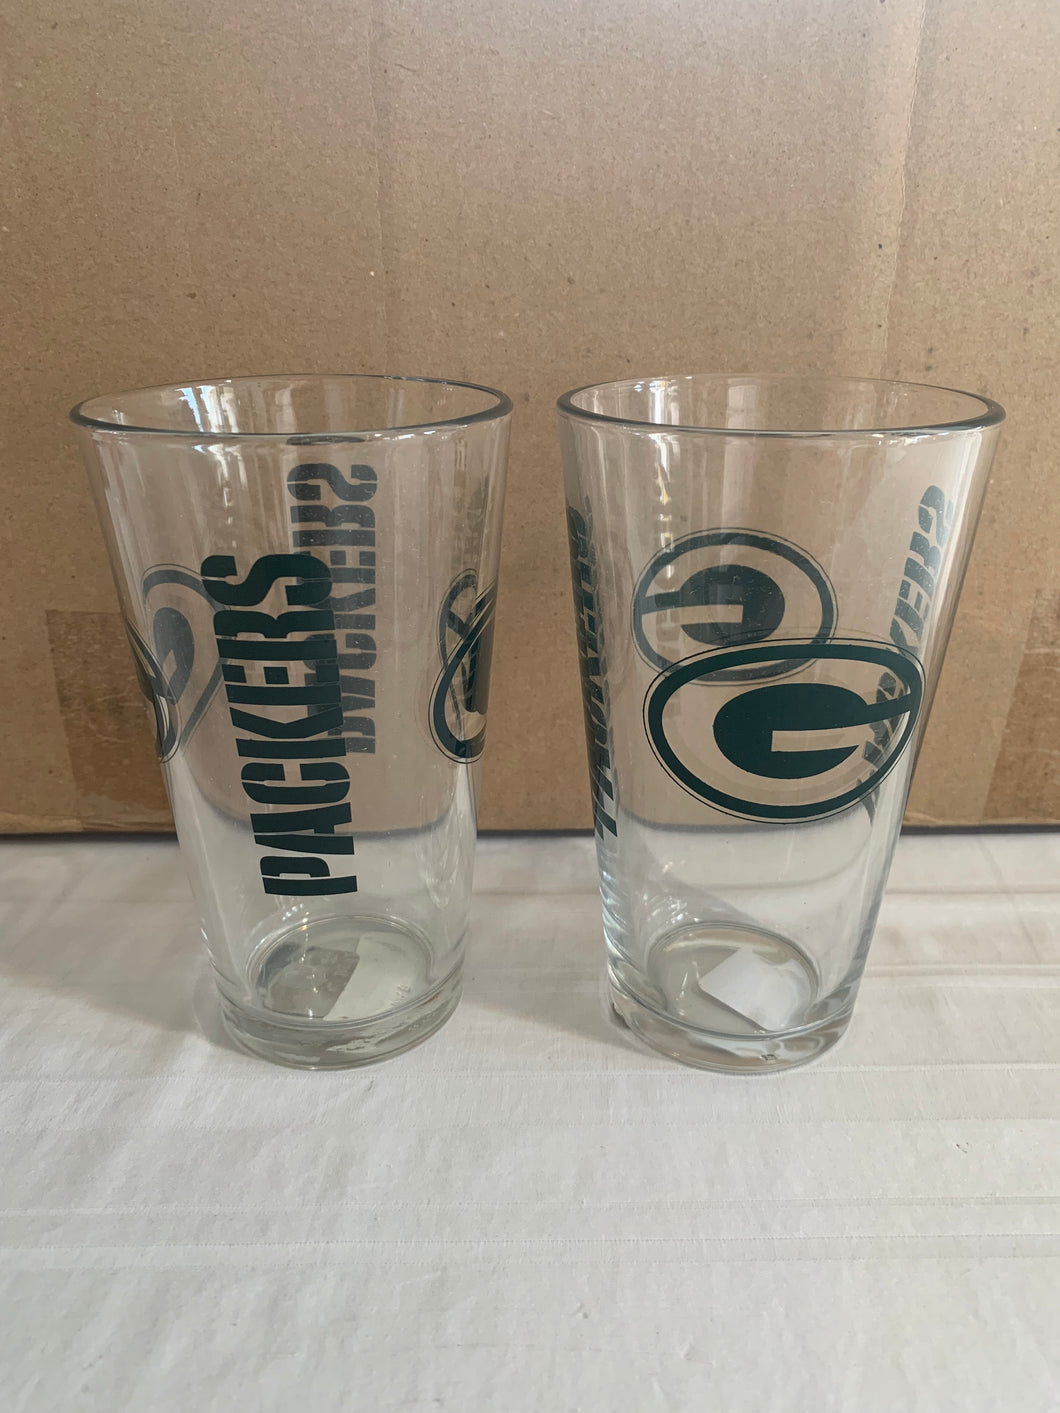 Green Bay Packers NFL Set of 16oz Pint Glass Cup Mug Boelter Brands - Casey's Sports Store